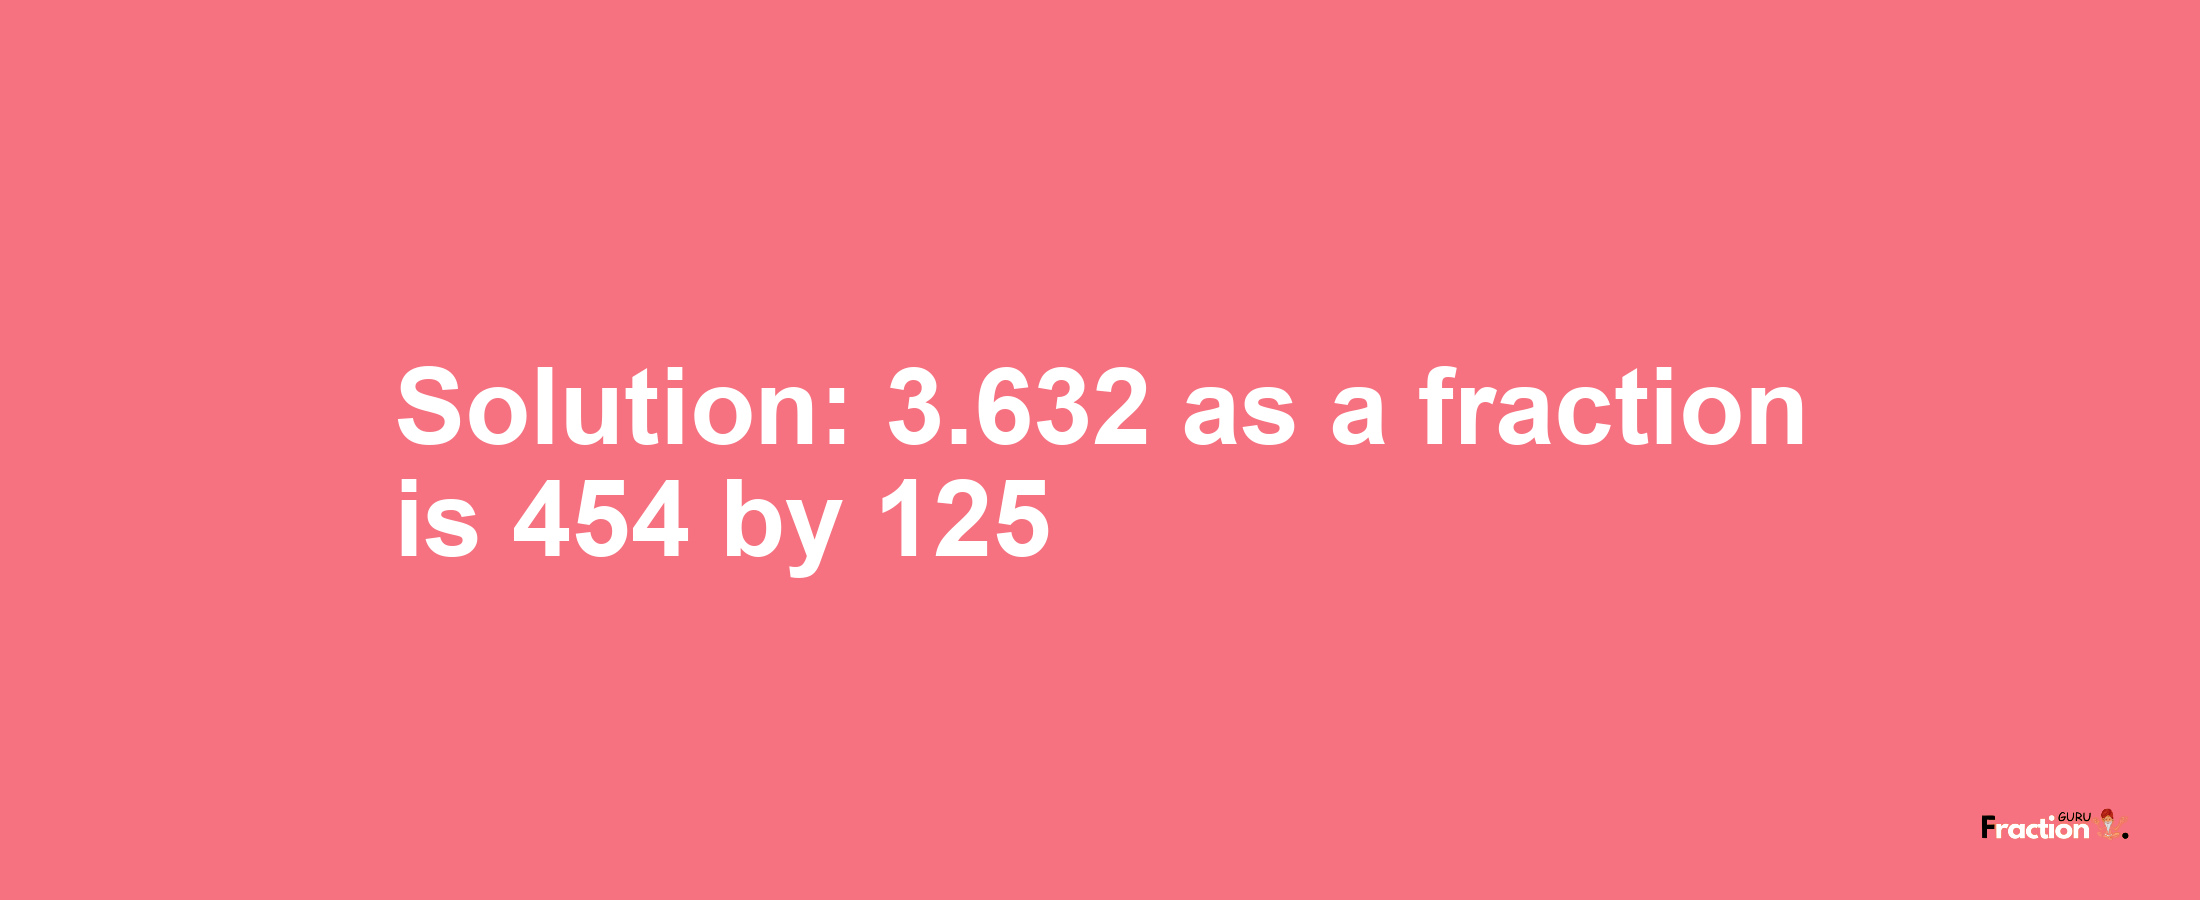 Solution:3.632 as a fraction is 454/125